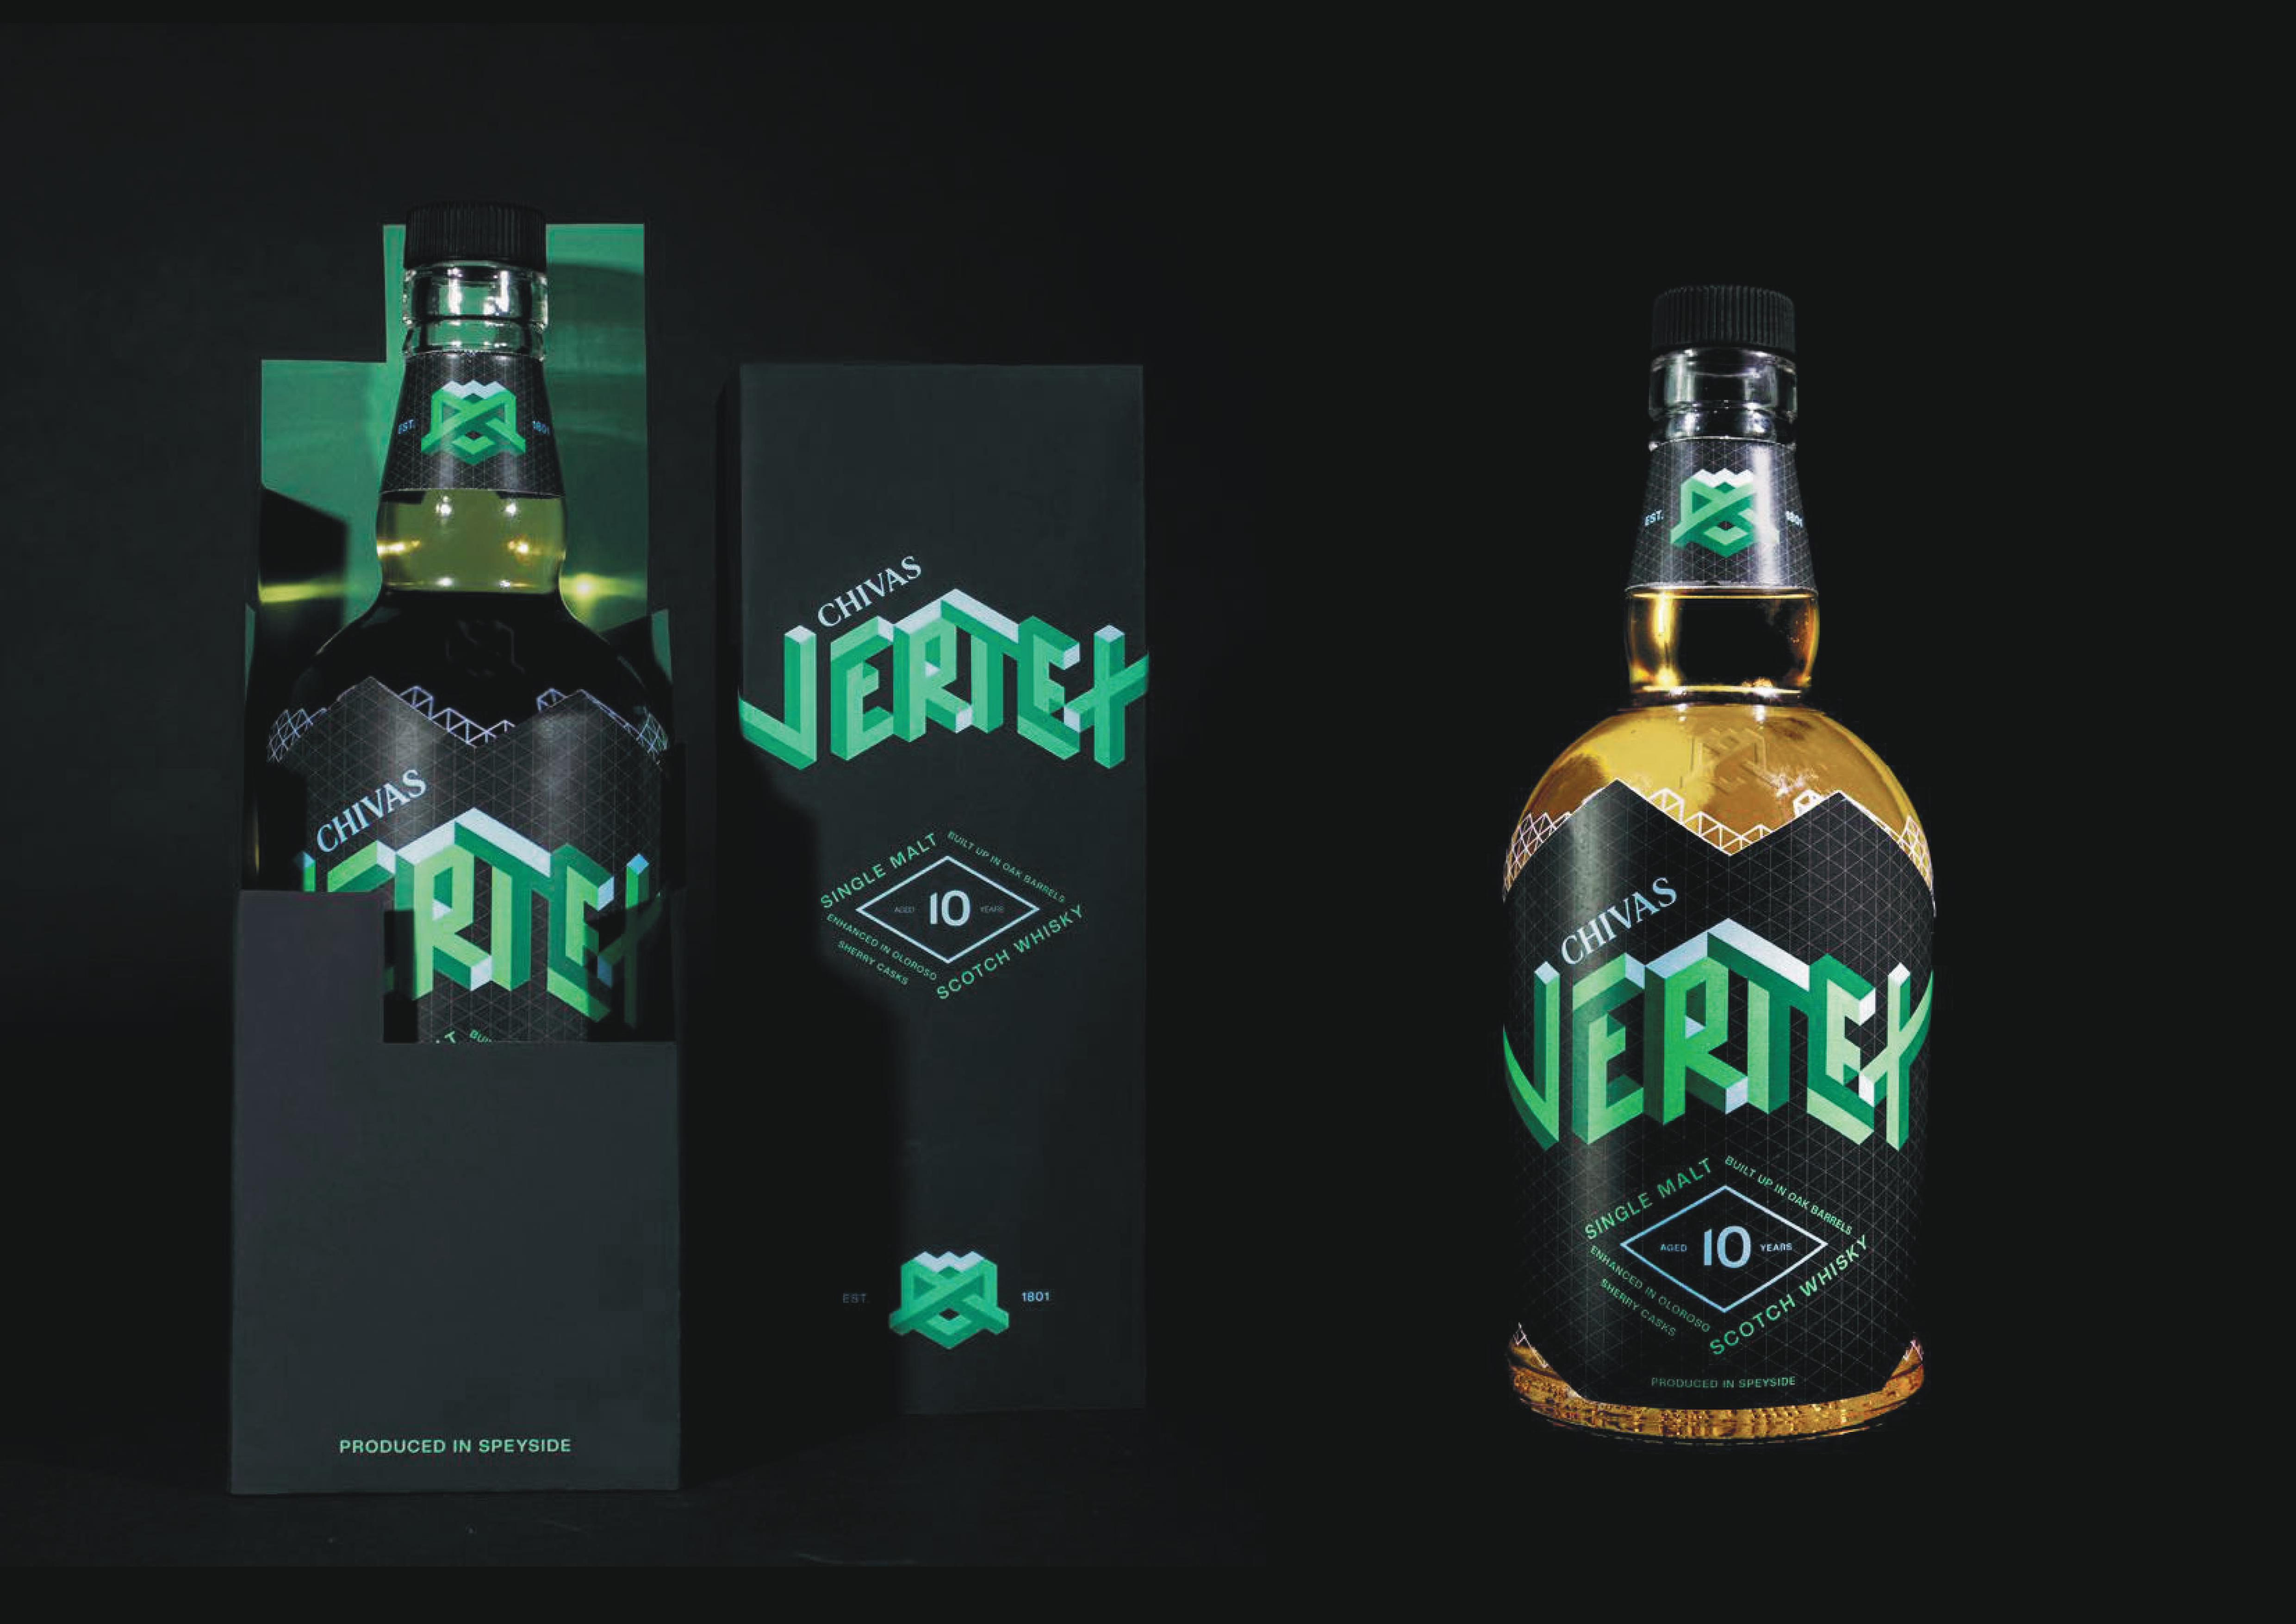 BA Graphic Design work by Niamh Sparrow showing a black whisky bottle and box designed using green 3D shapes which were made using perspective